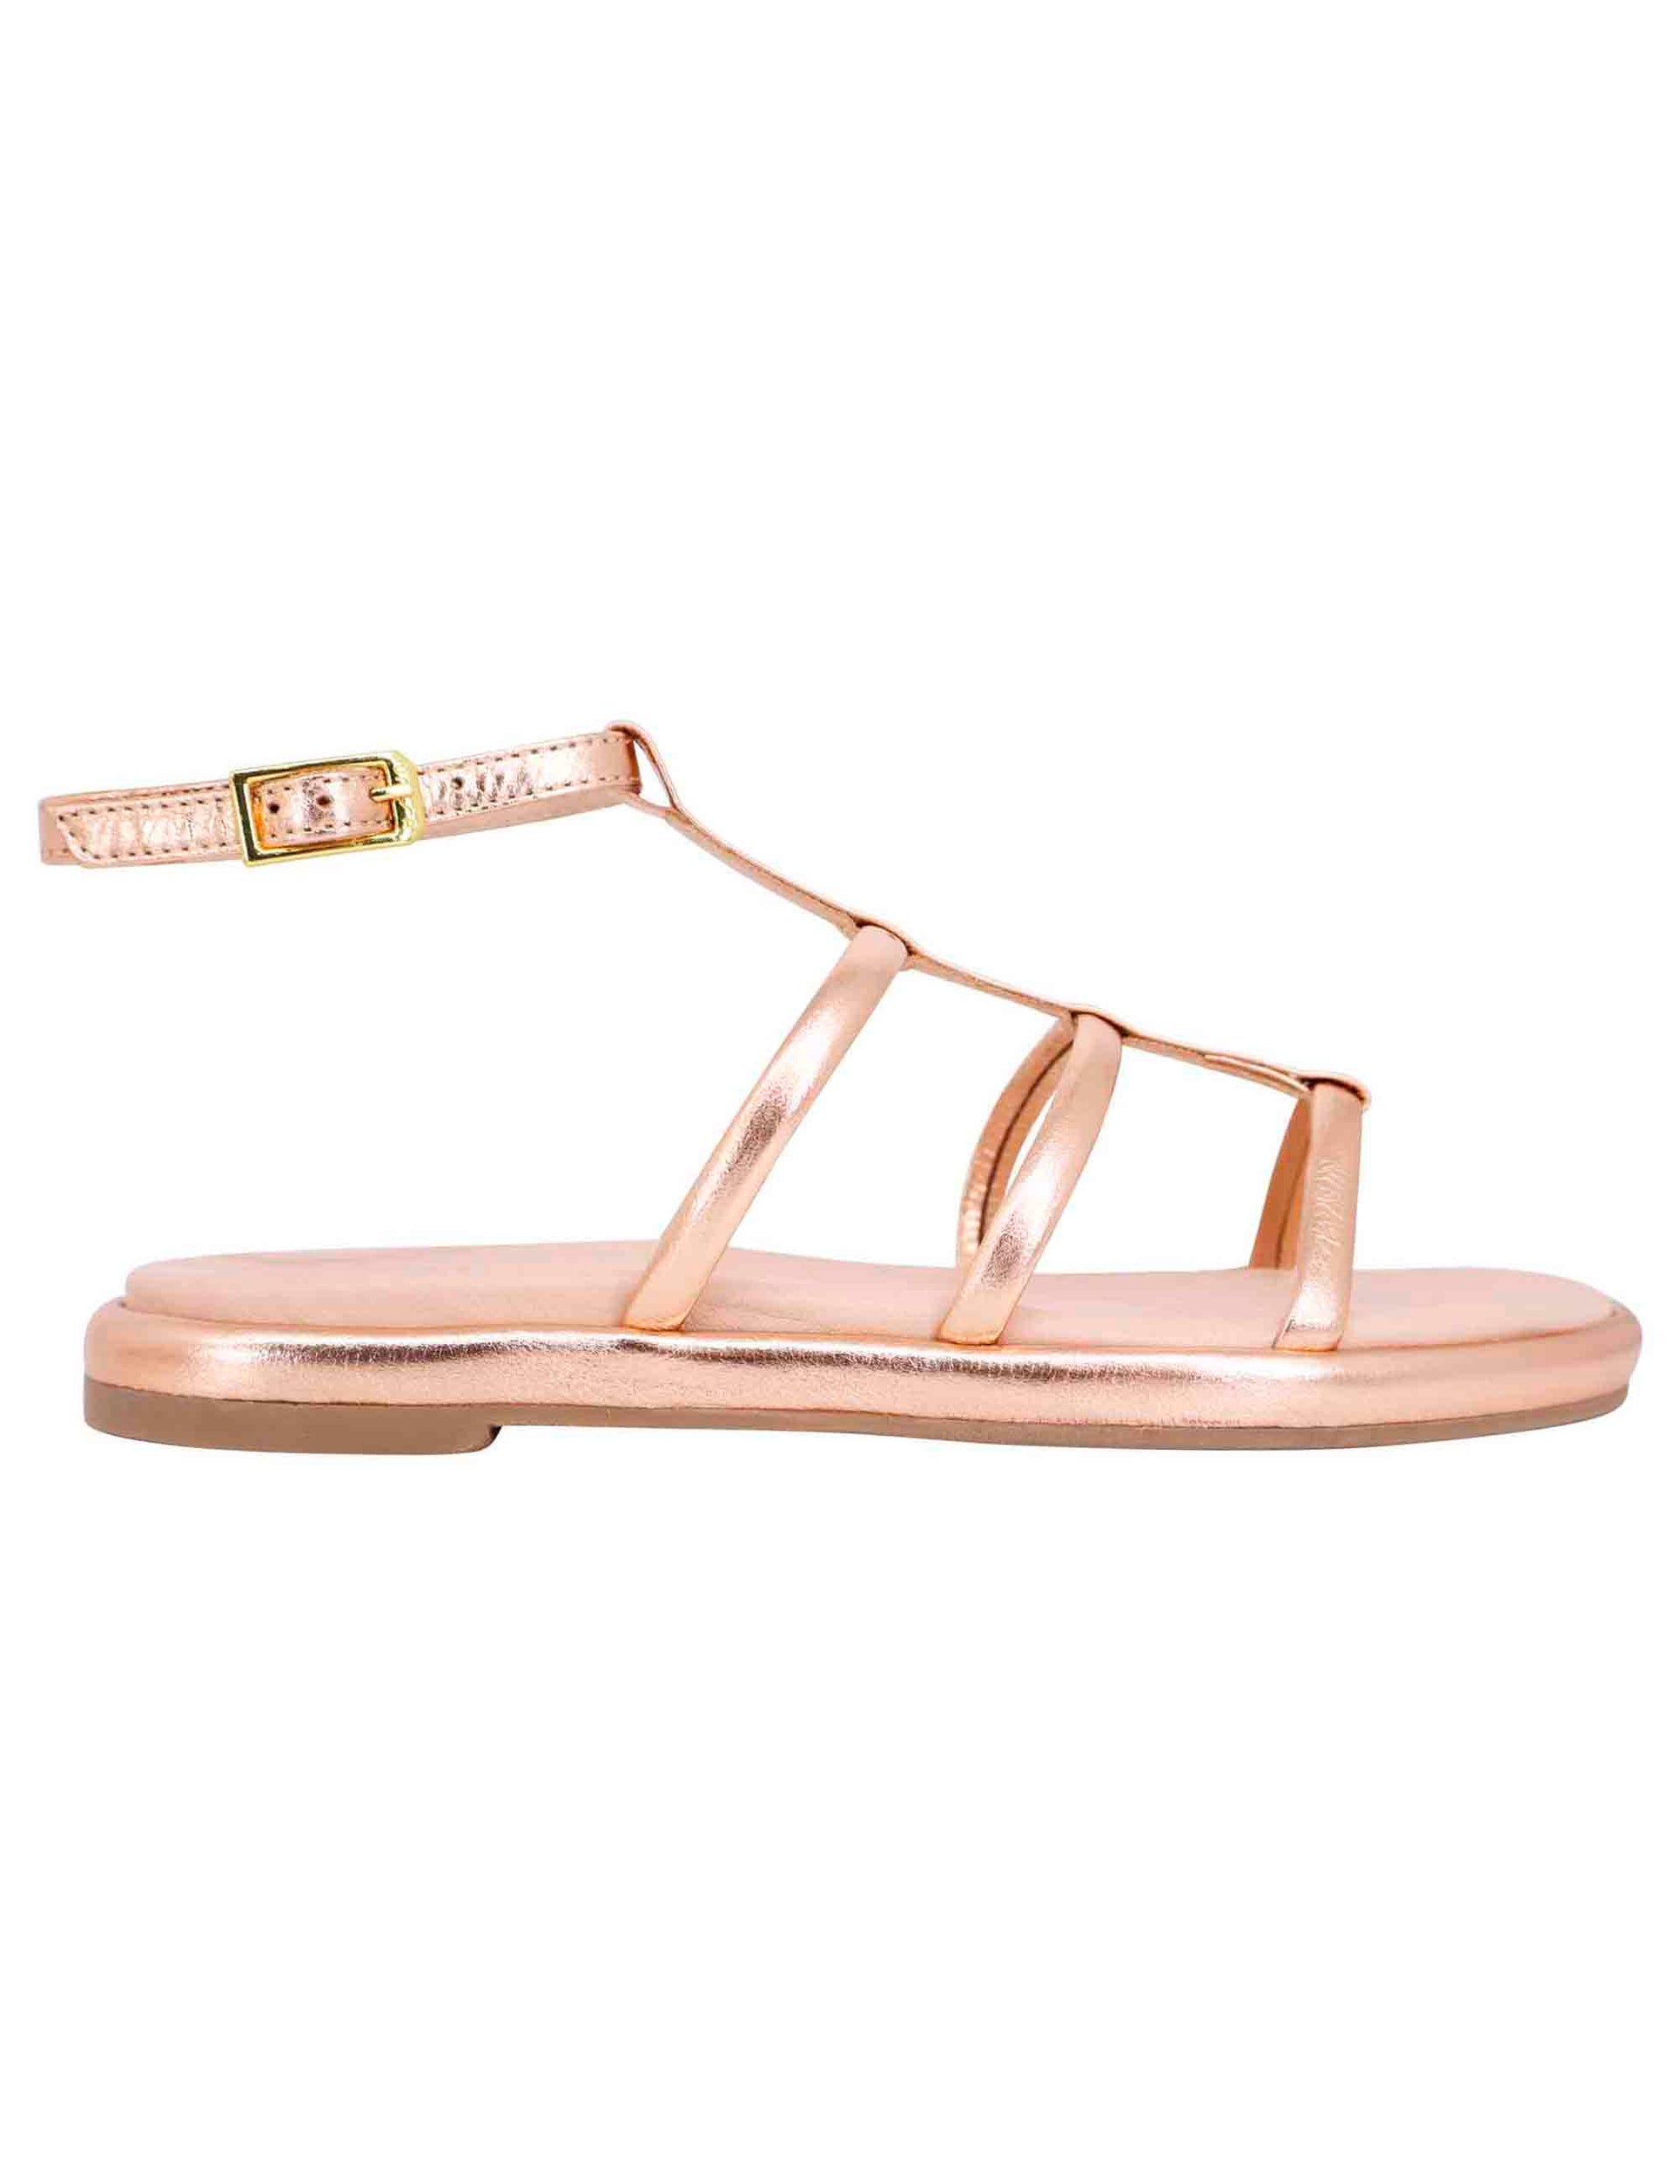 Women's flat sandals in rose gold laminated leather with ankle strap